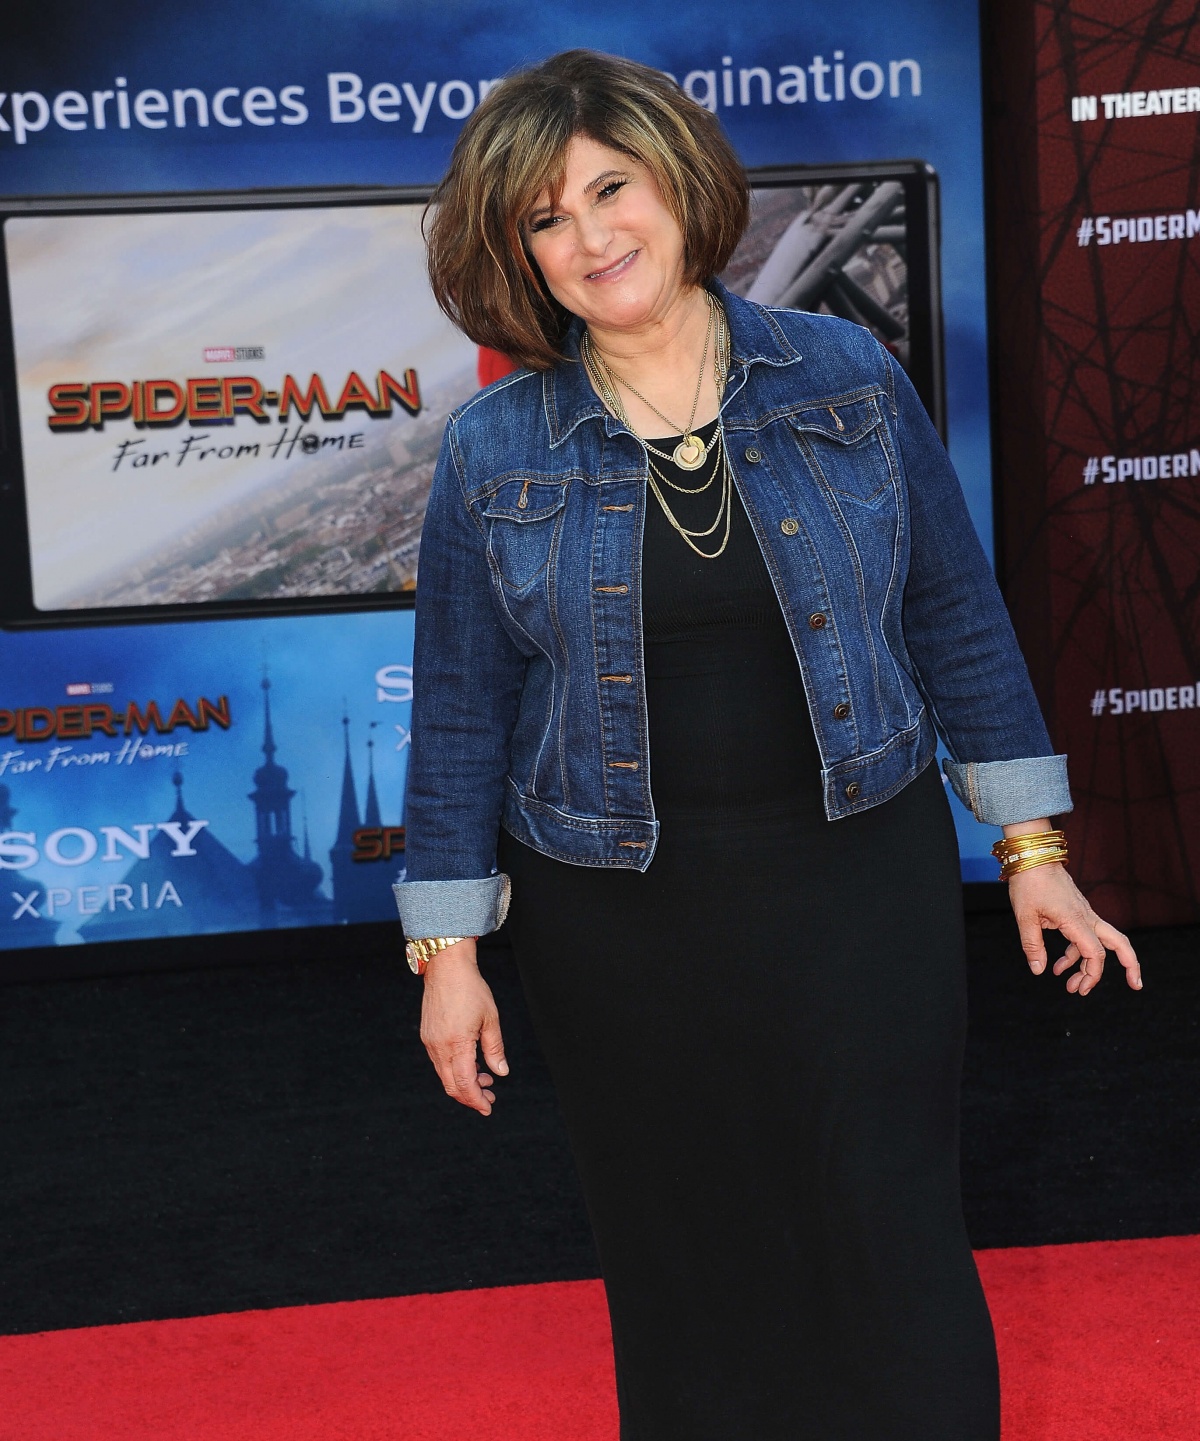 Amy Pascal At The Premiere Of Sony Pictures' "Spider-Man Far From Home" - Arrivals